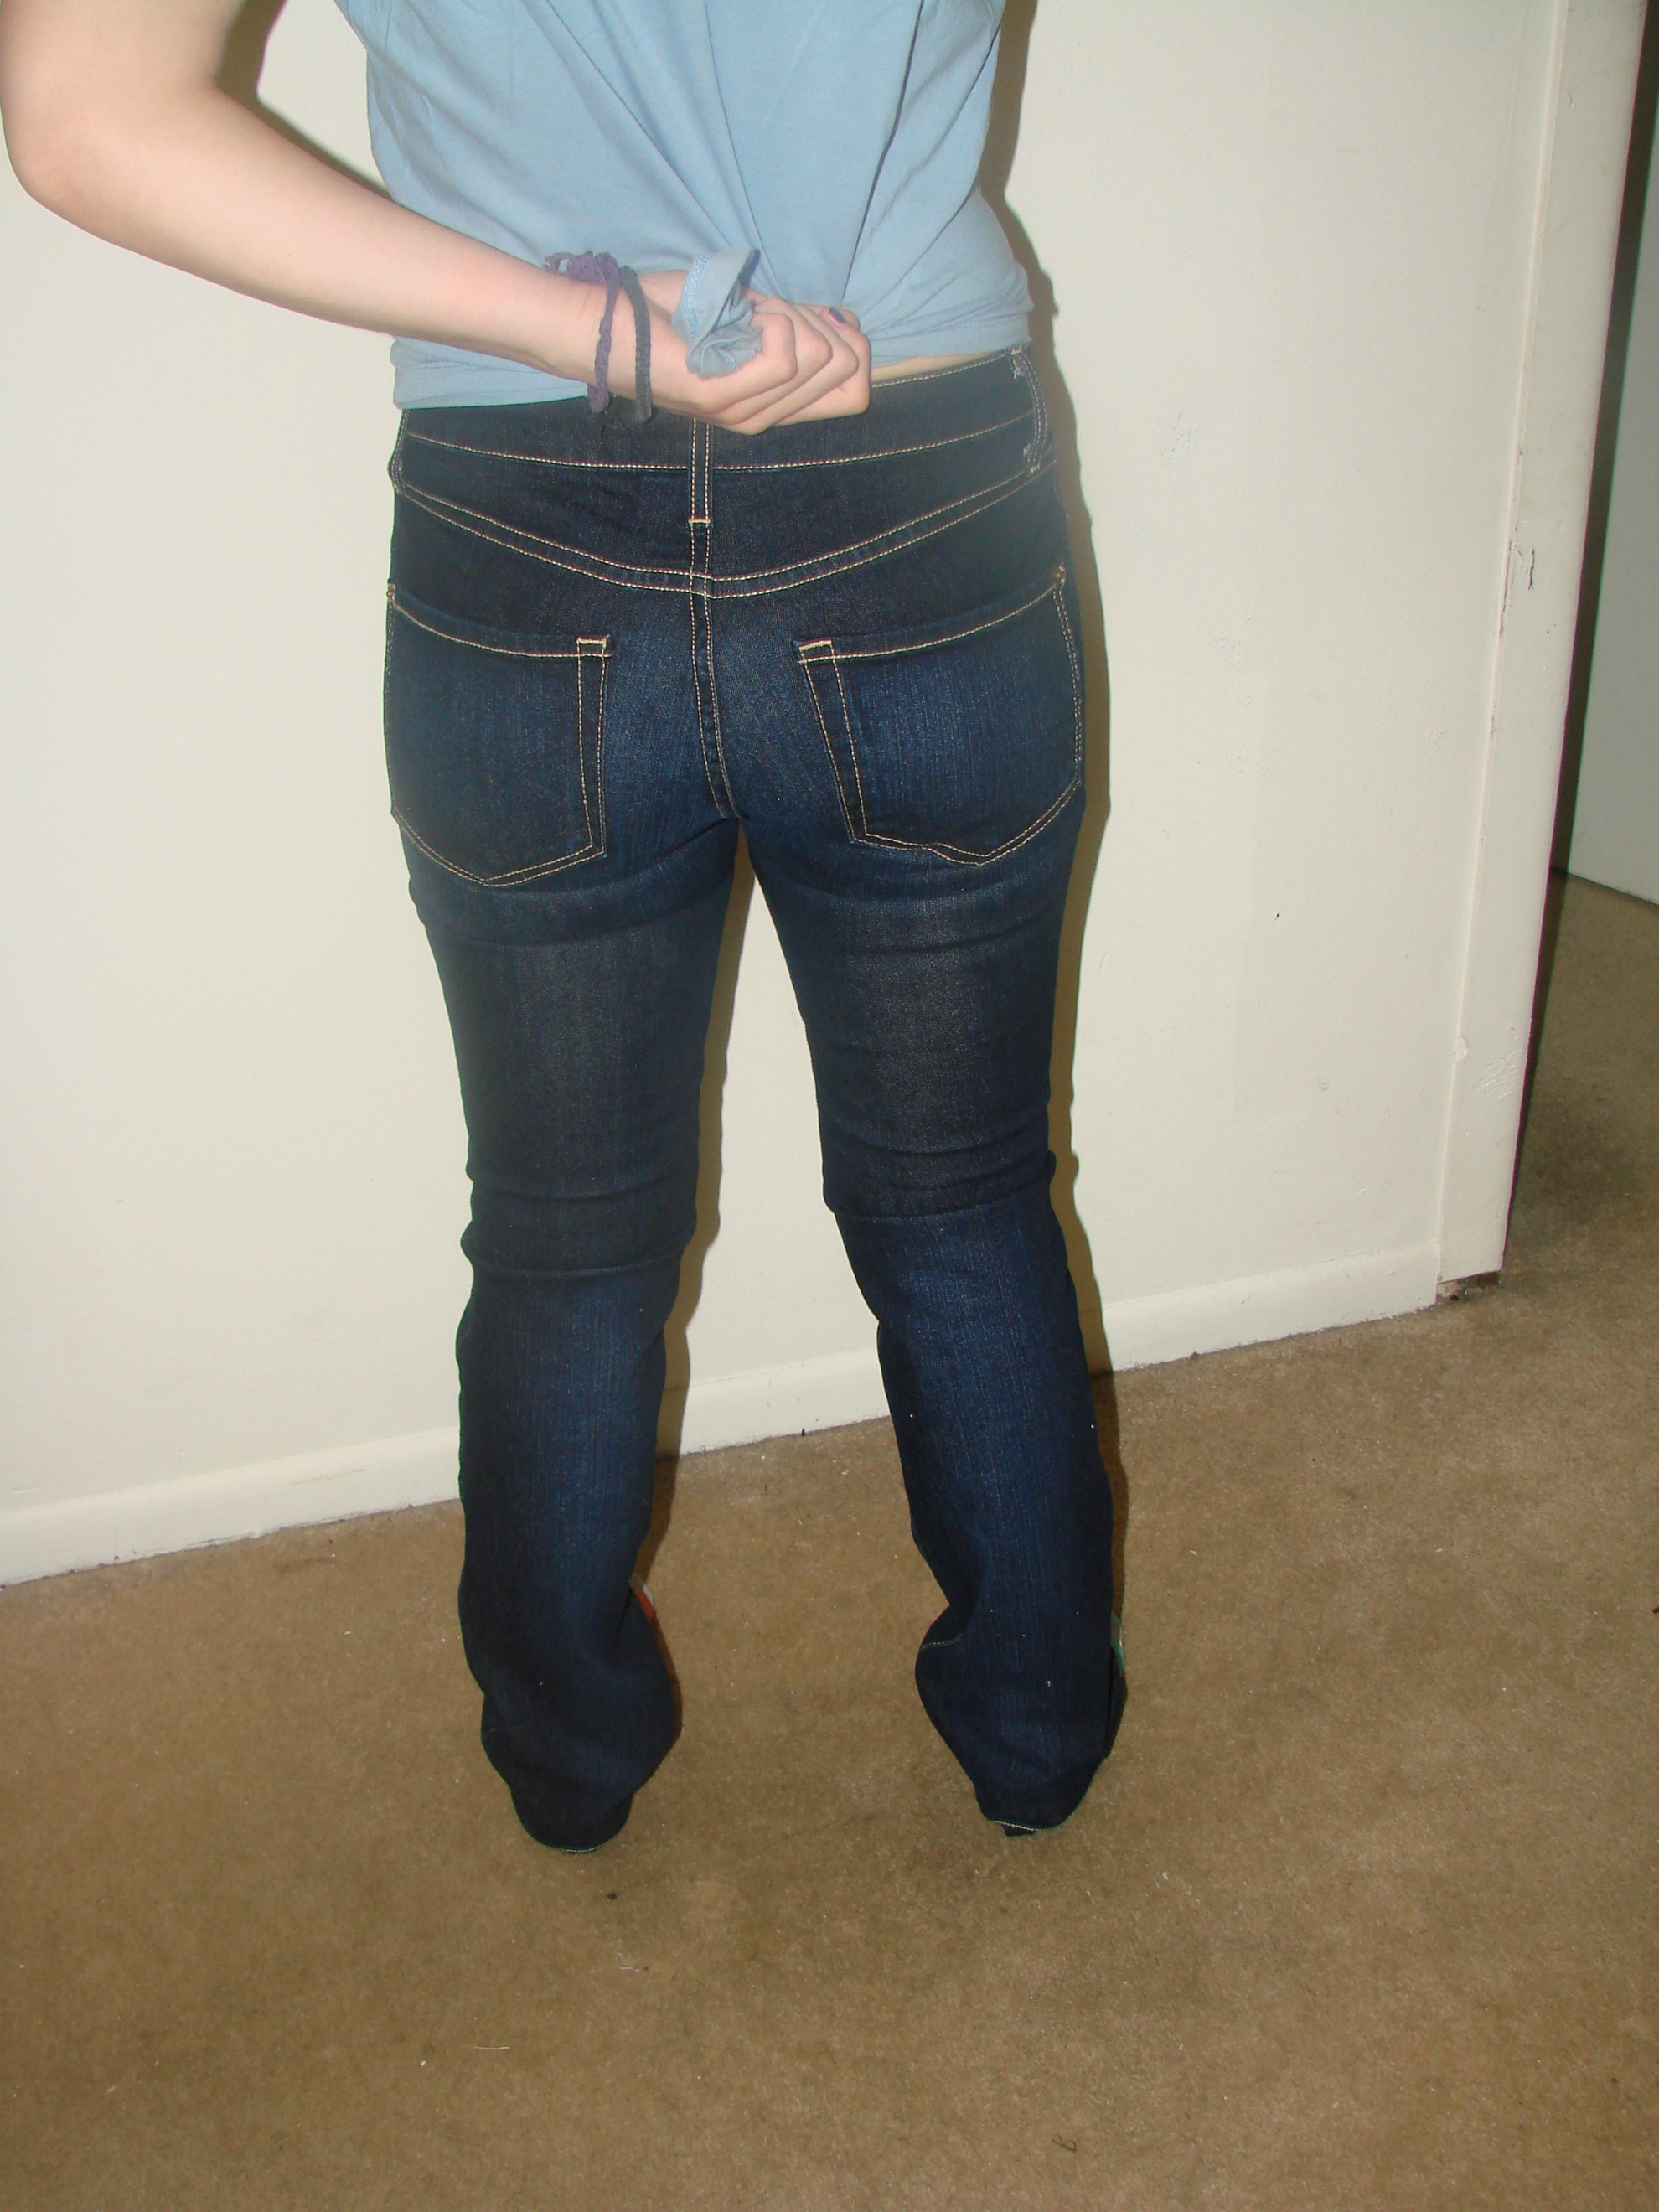 Slimming Skinny Jeans Review & Giveaway | Emily Reviews